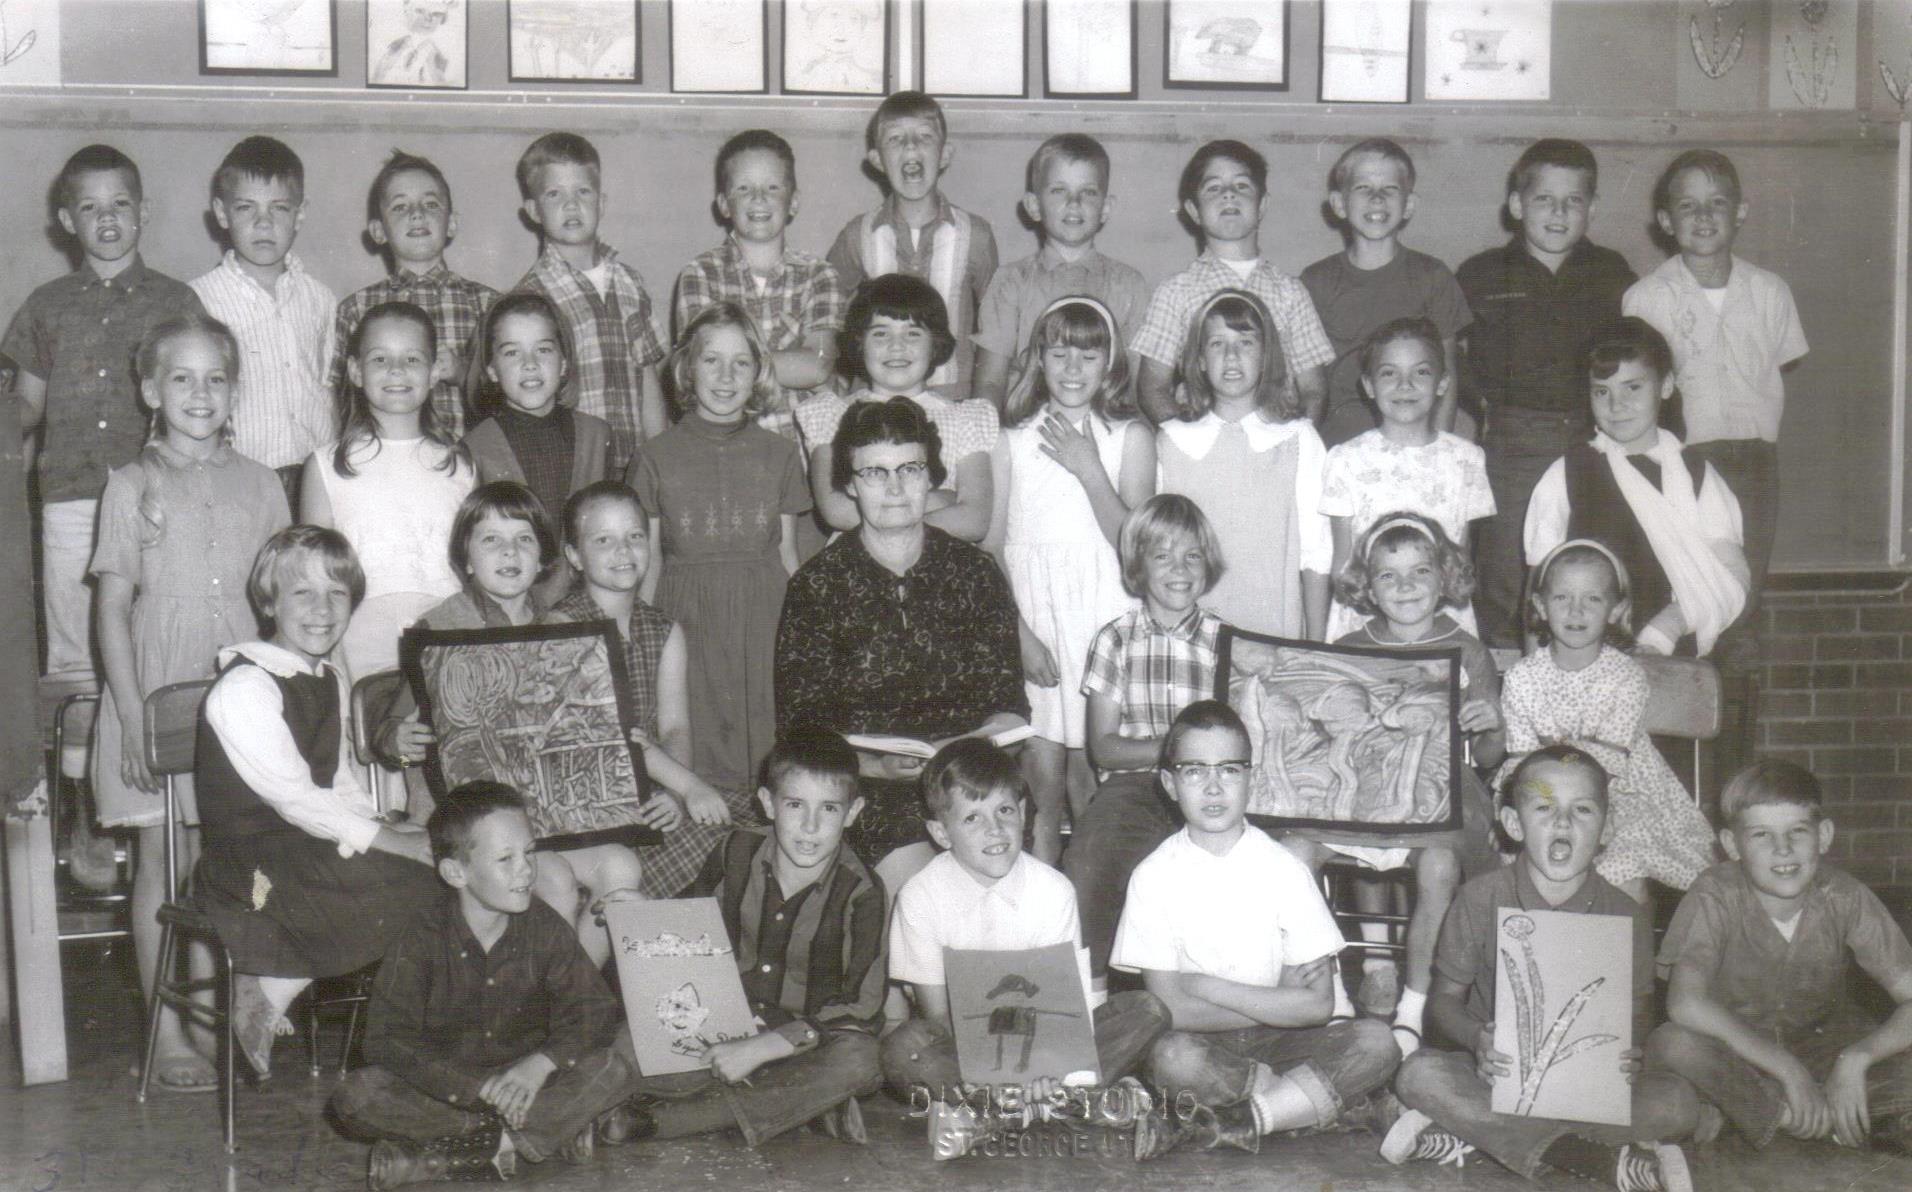 Mrs. Ruth Miles' 1965-1966 third grade class at East Elementary School